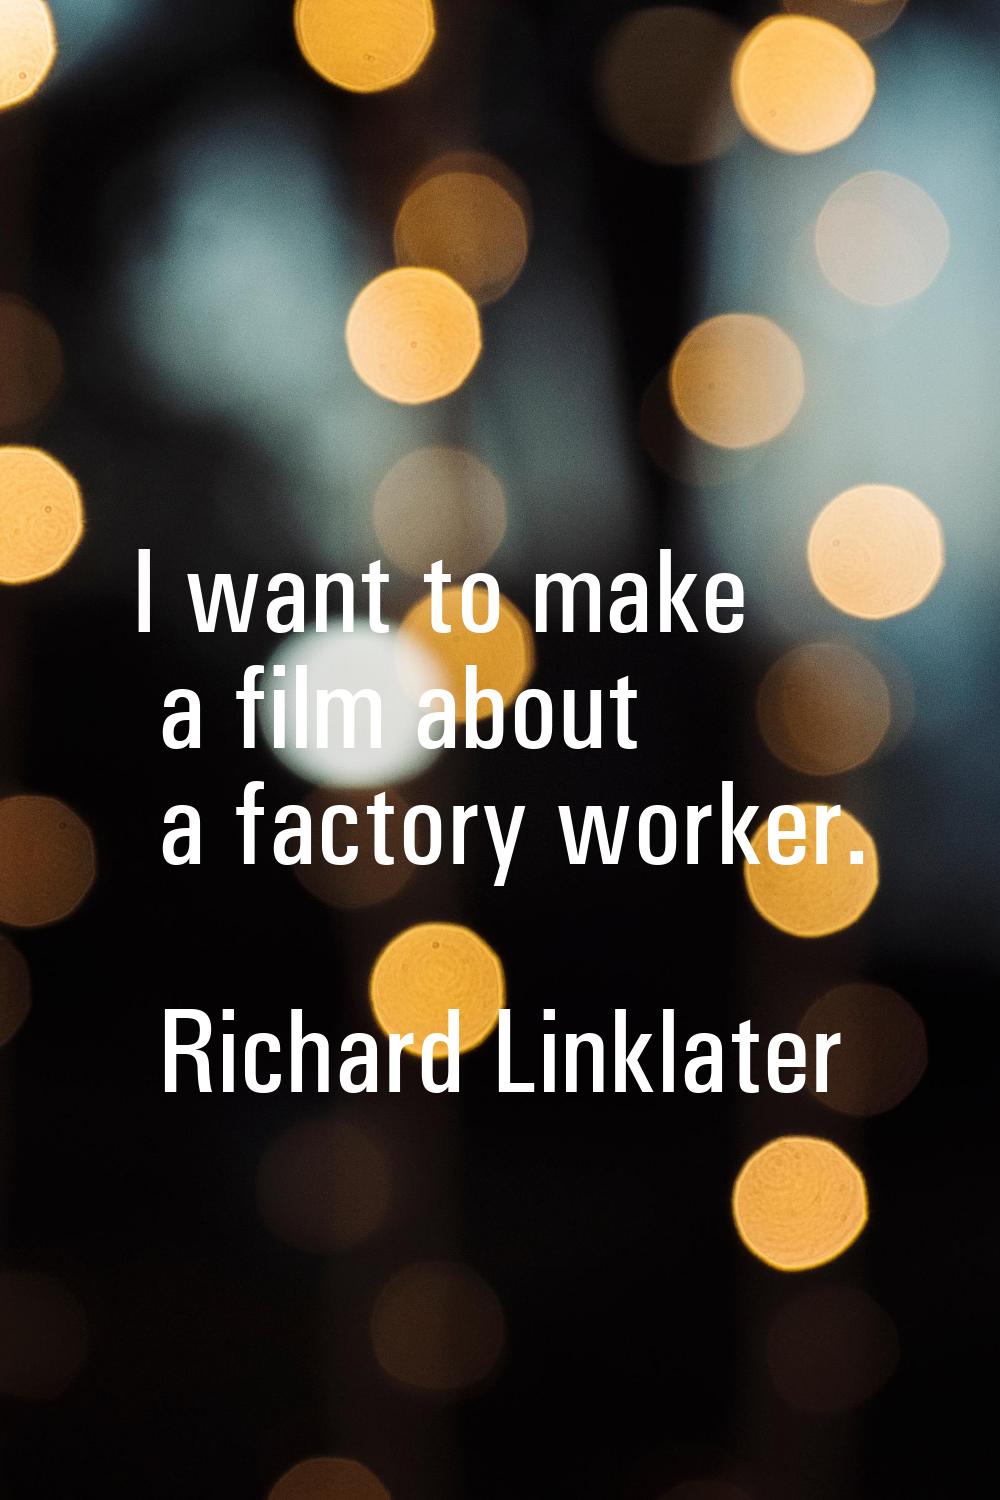 I want to make a film about a factory worker.